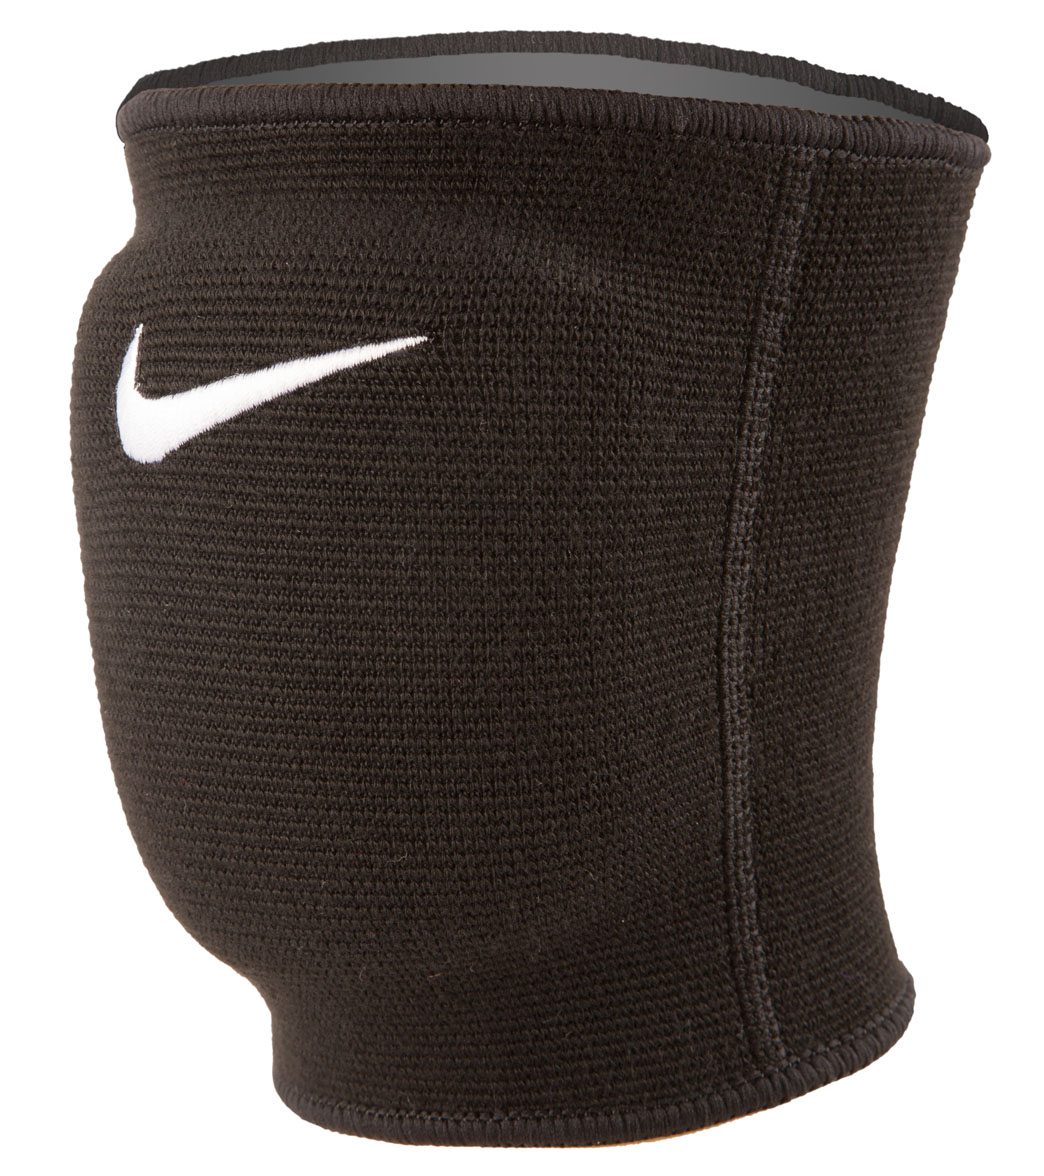 Nike Volleyball Knee Pads Size Chart